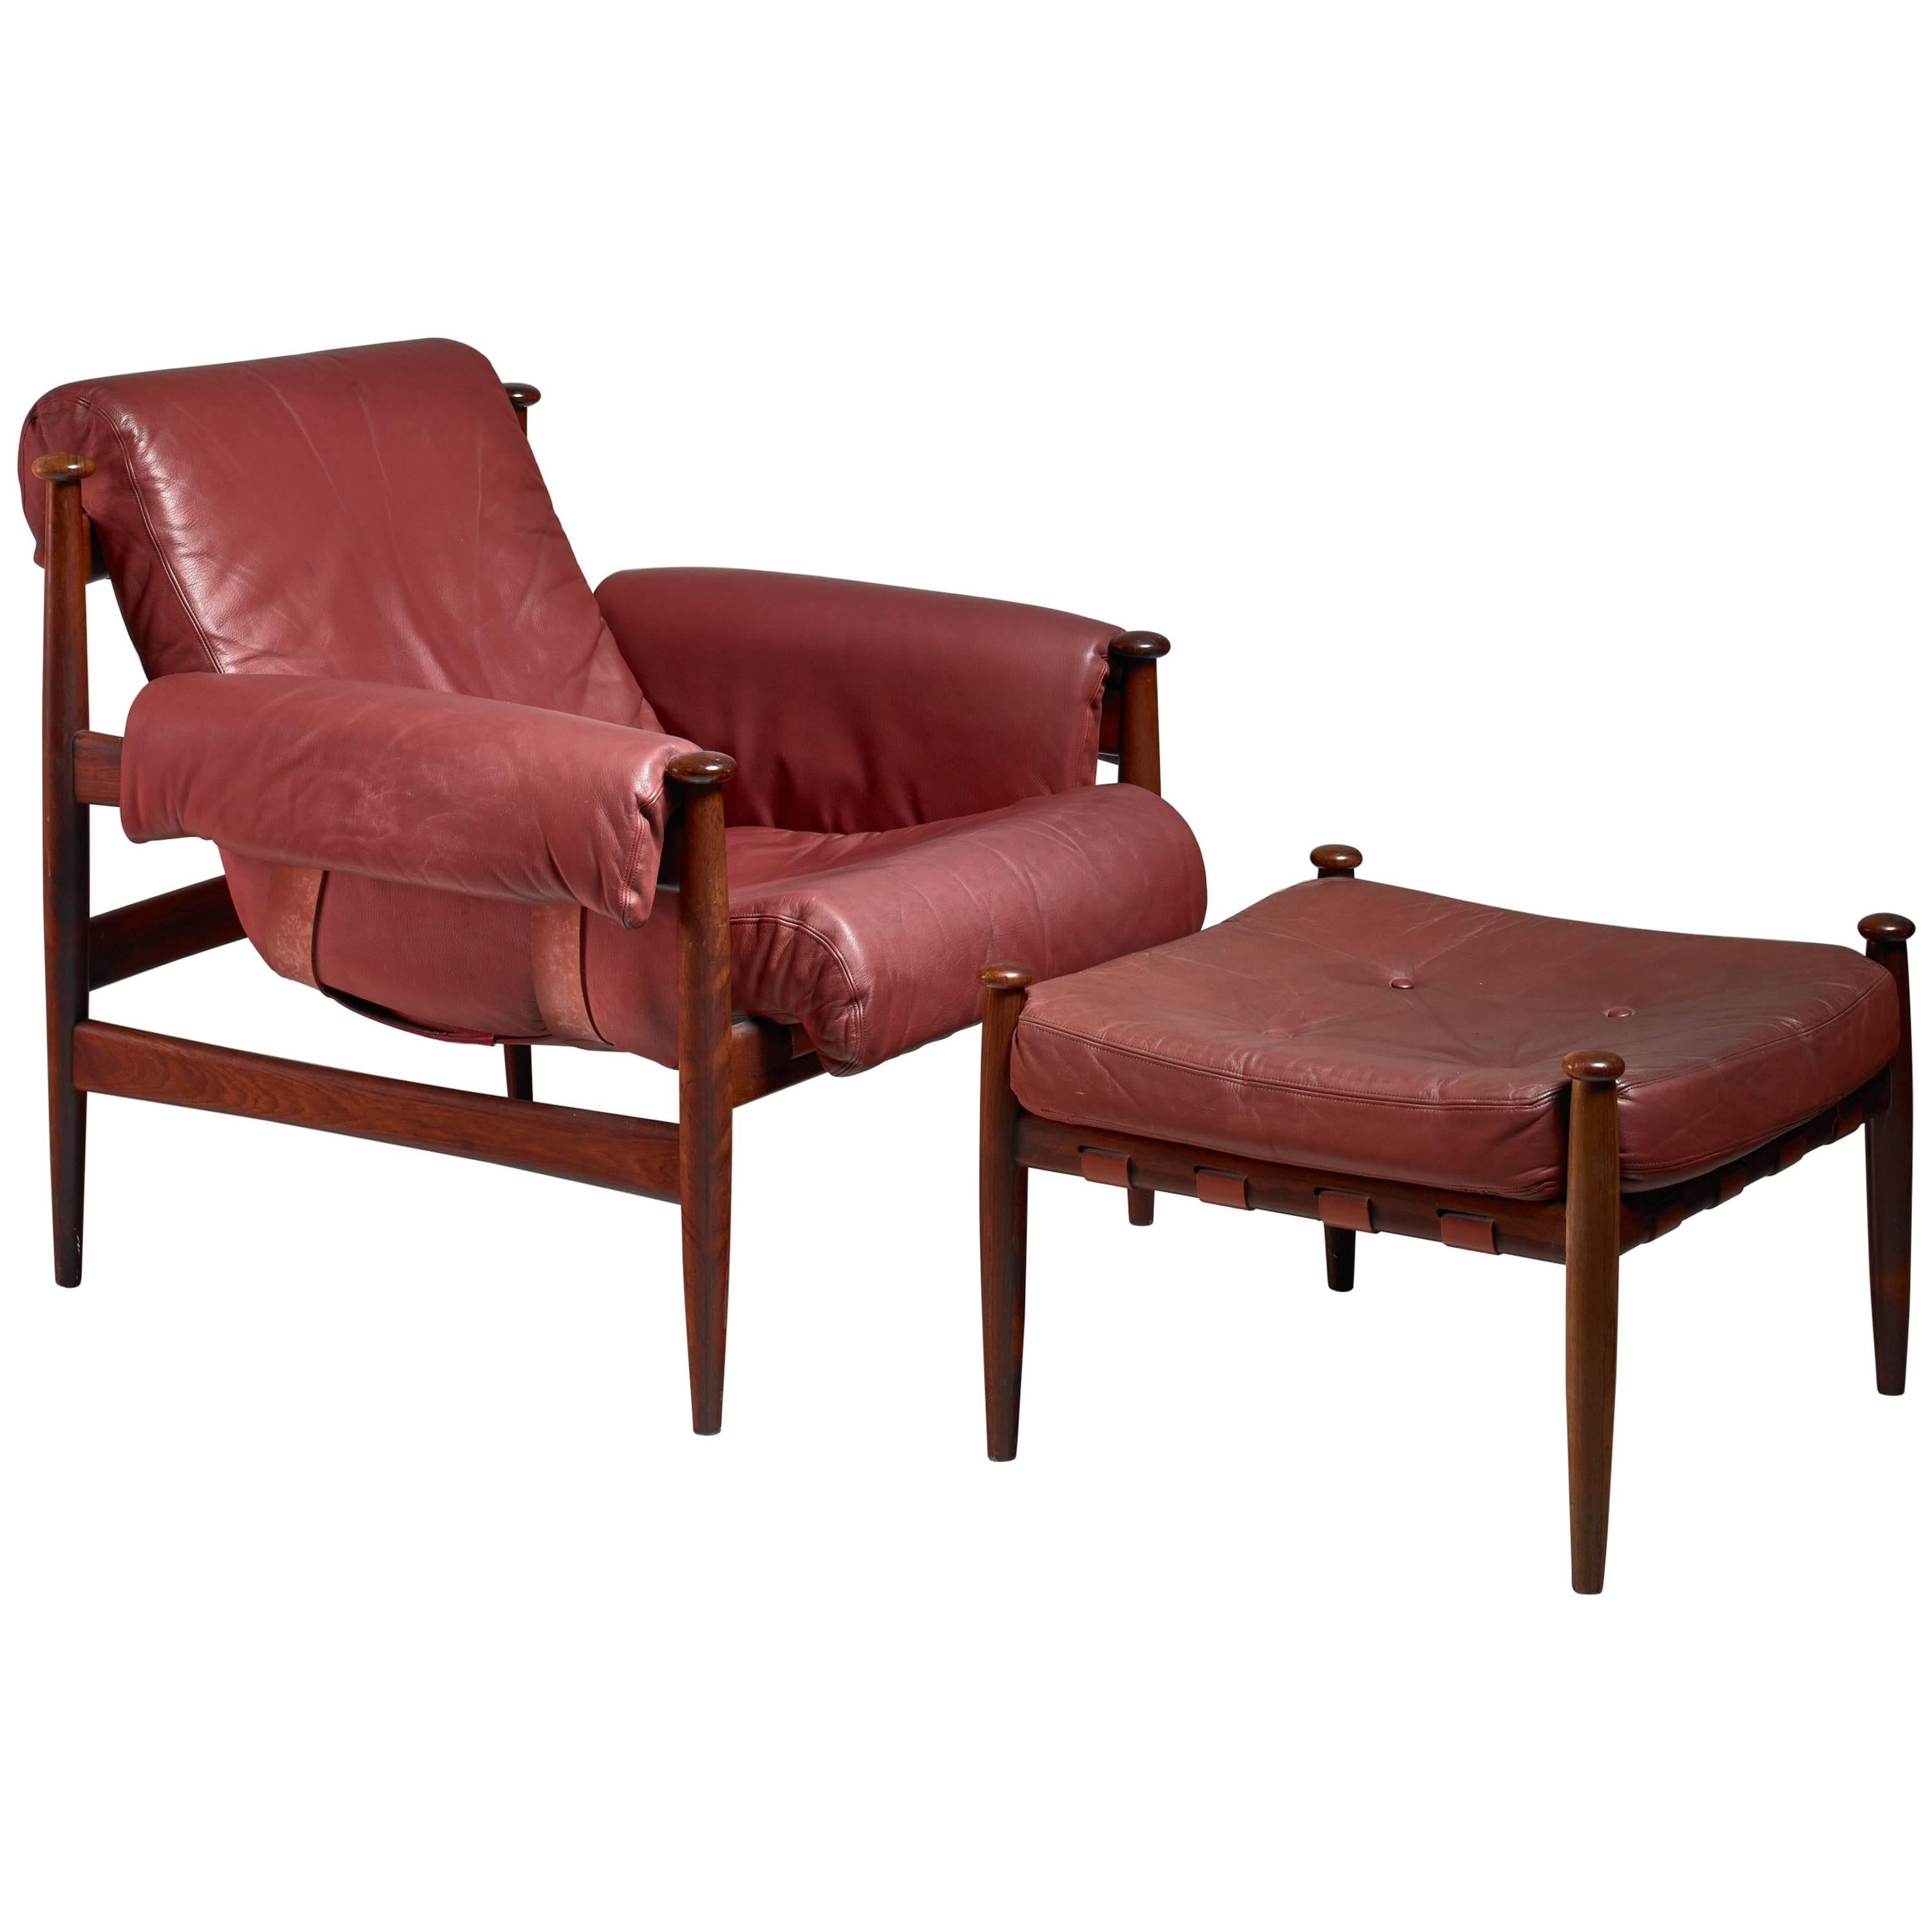 Eric Merthen Lounge Chair with Ottoman, Sweden, 1960s